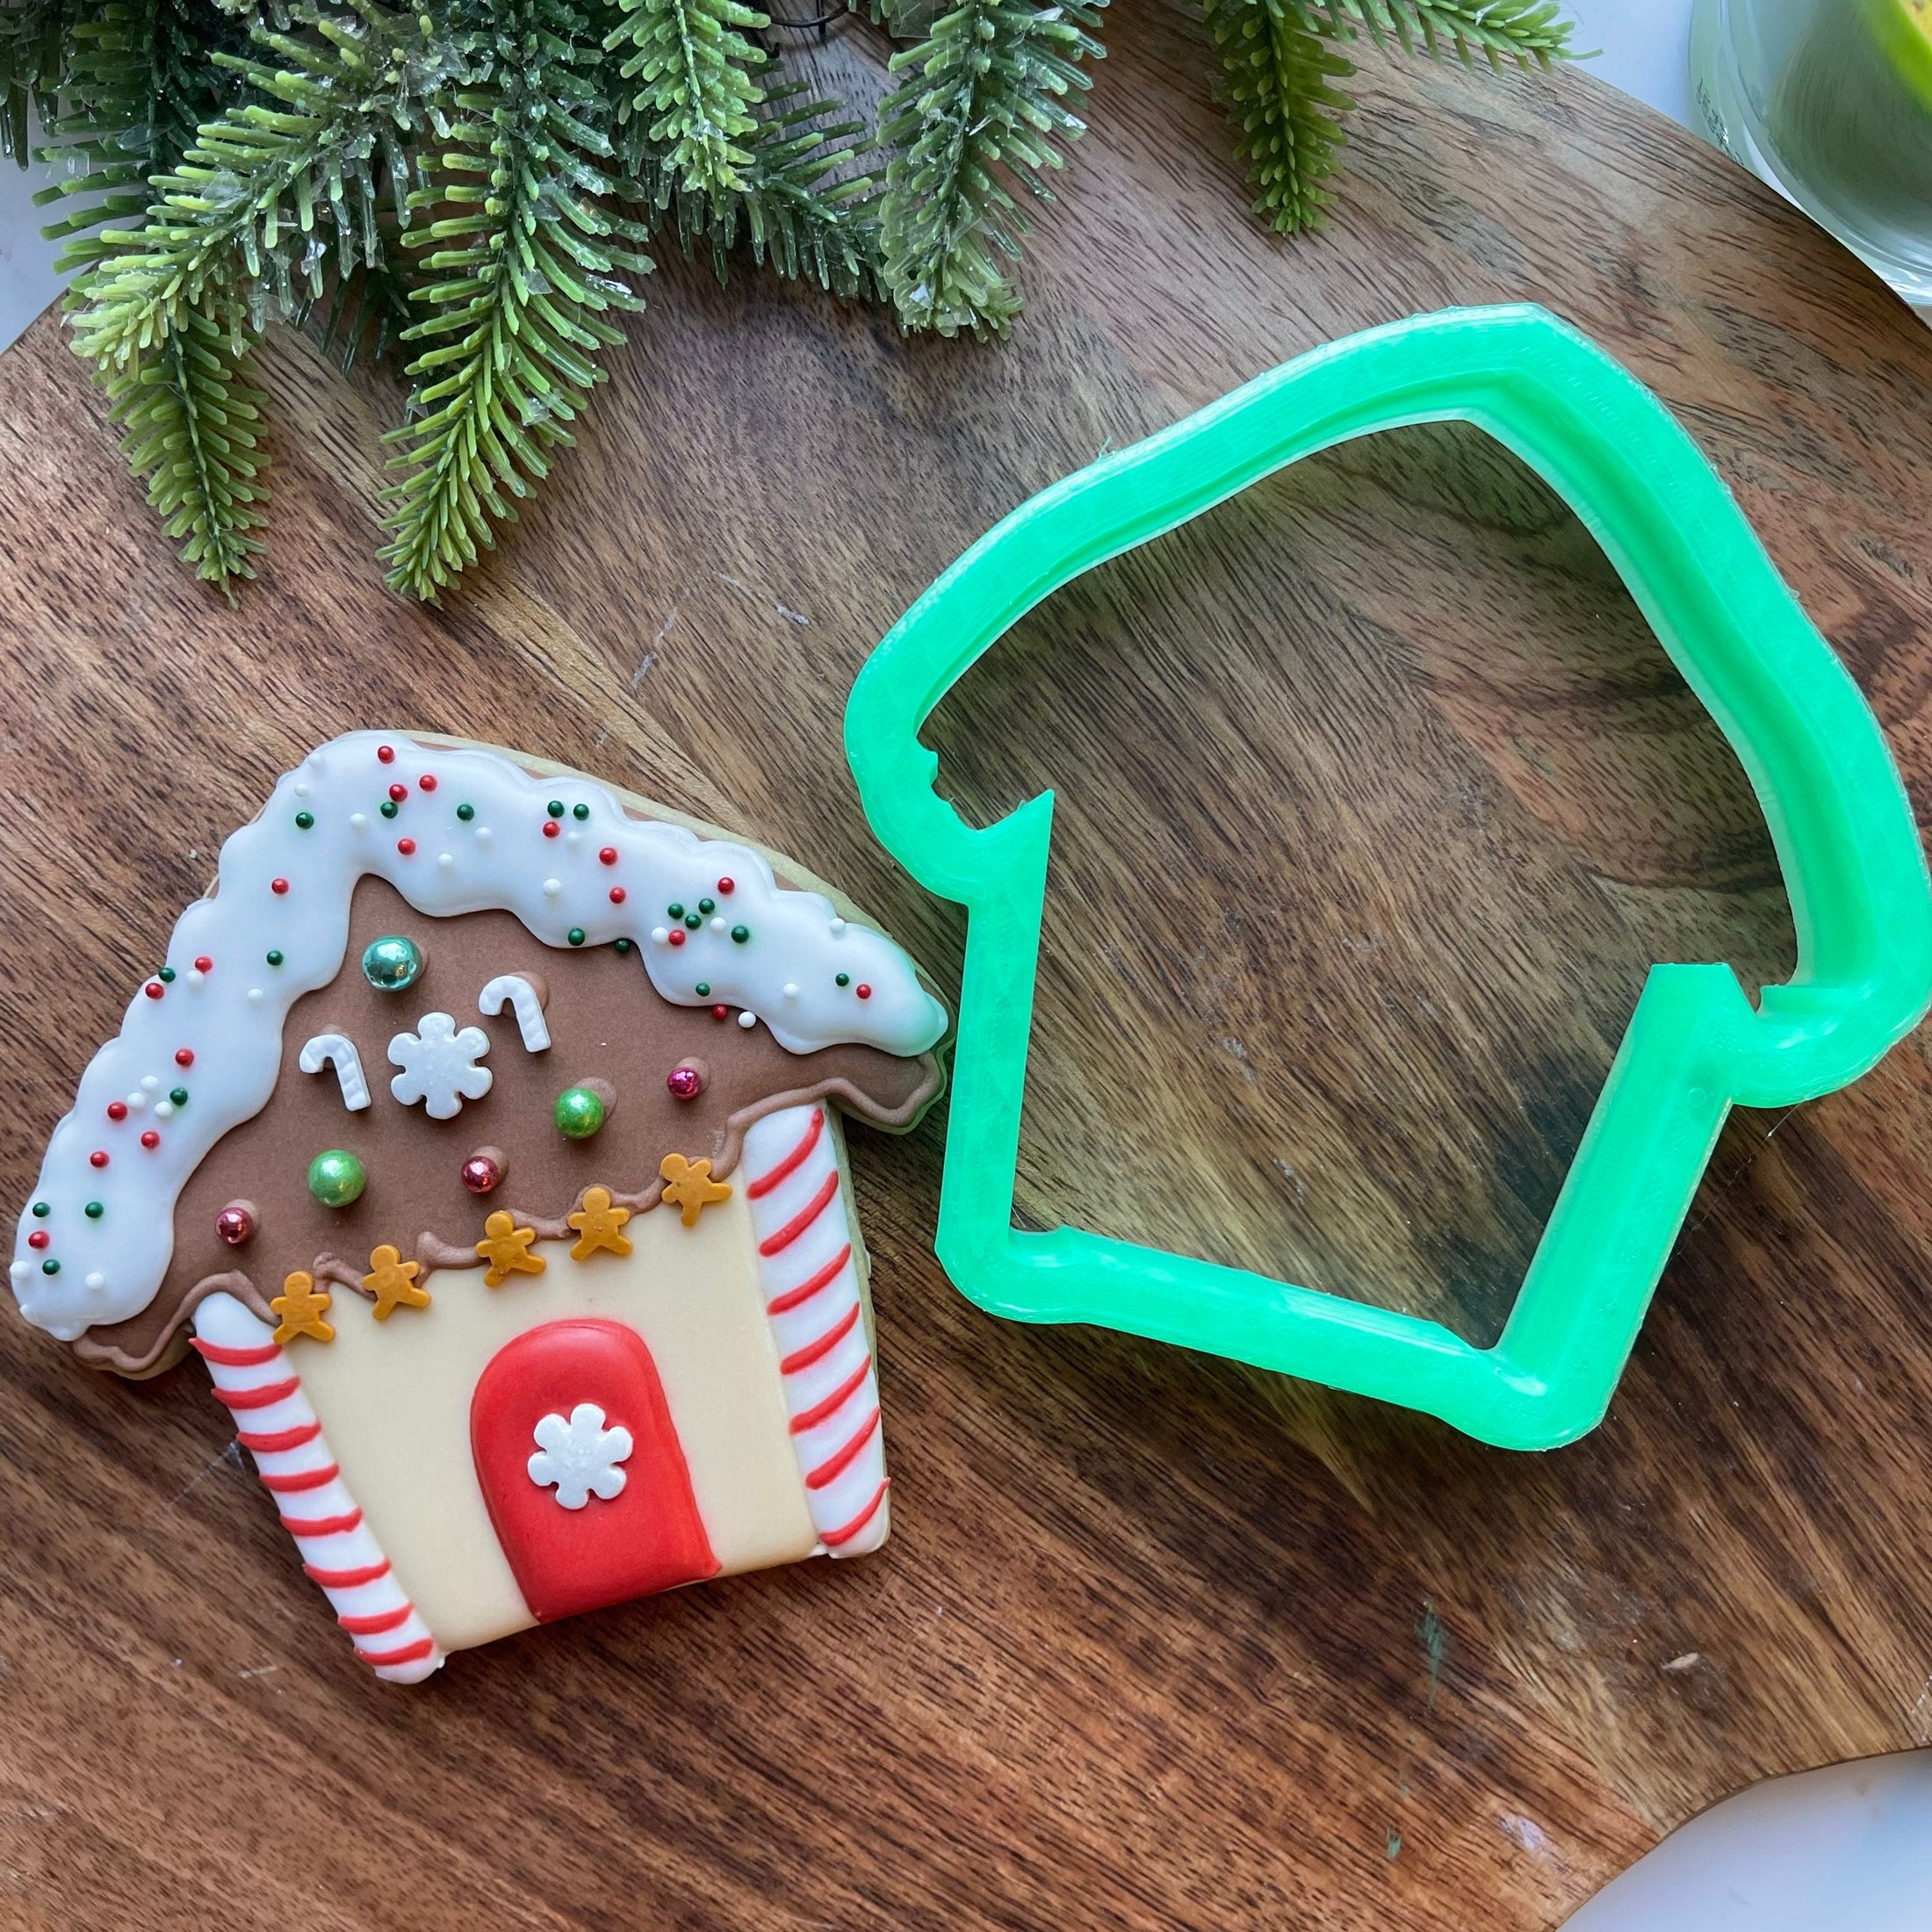 Gingerbread house cookie cutter